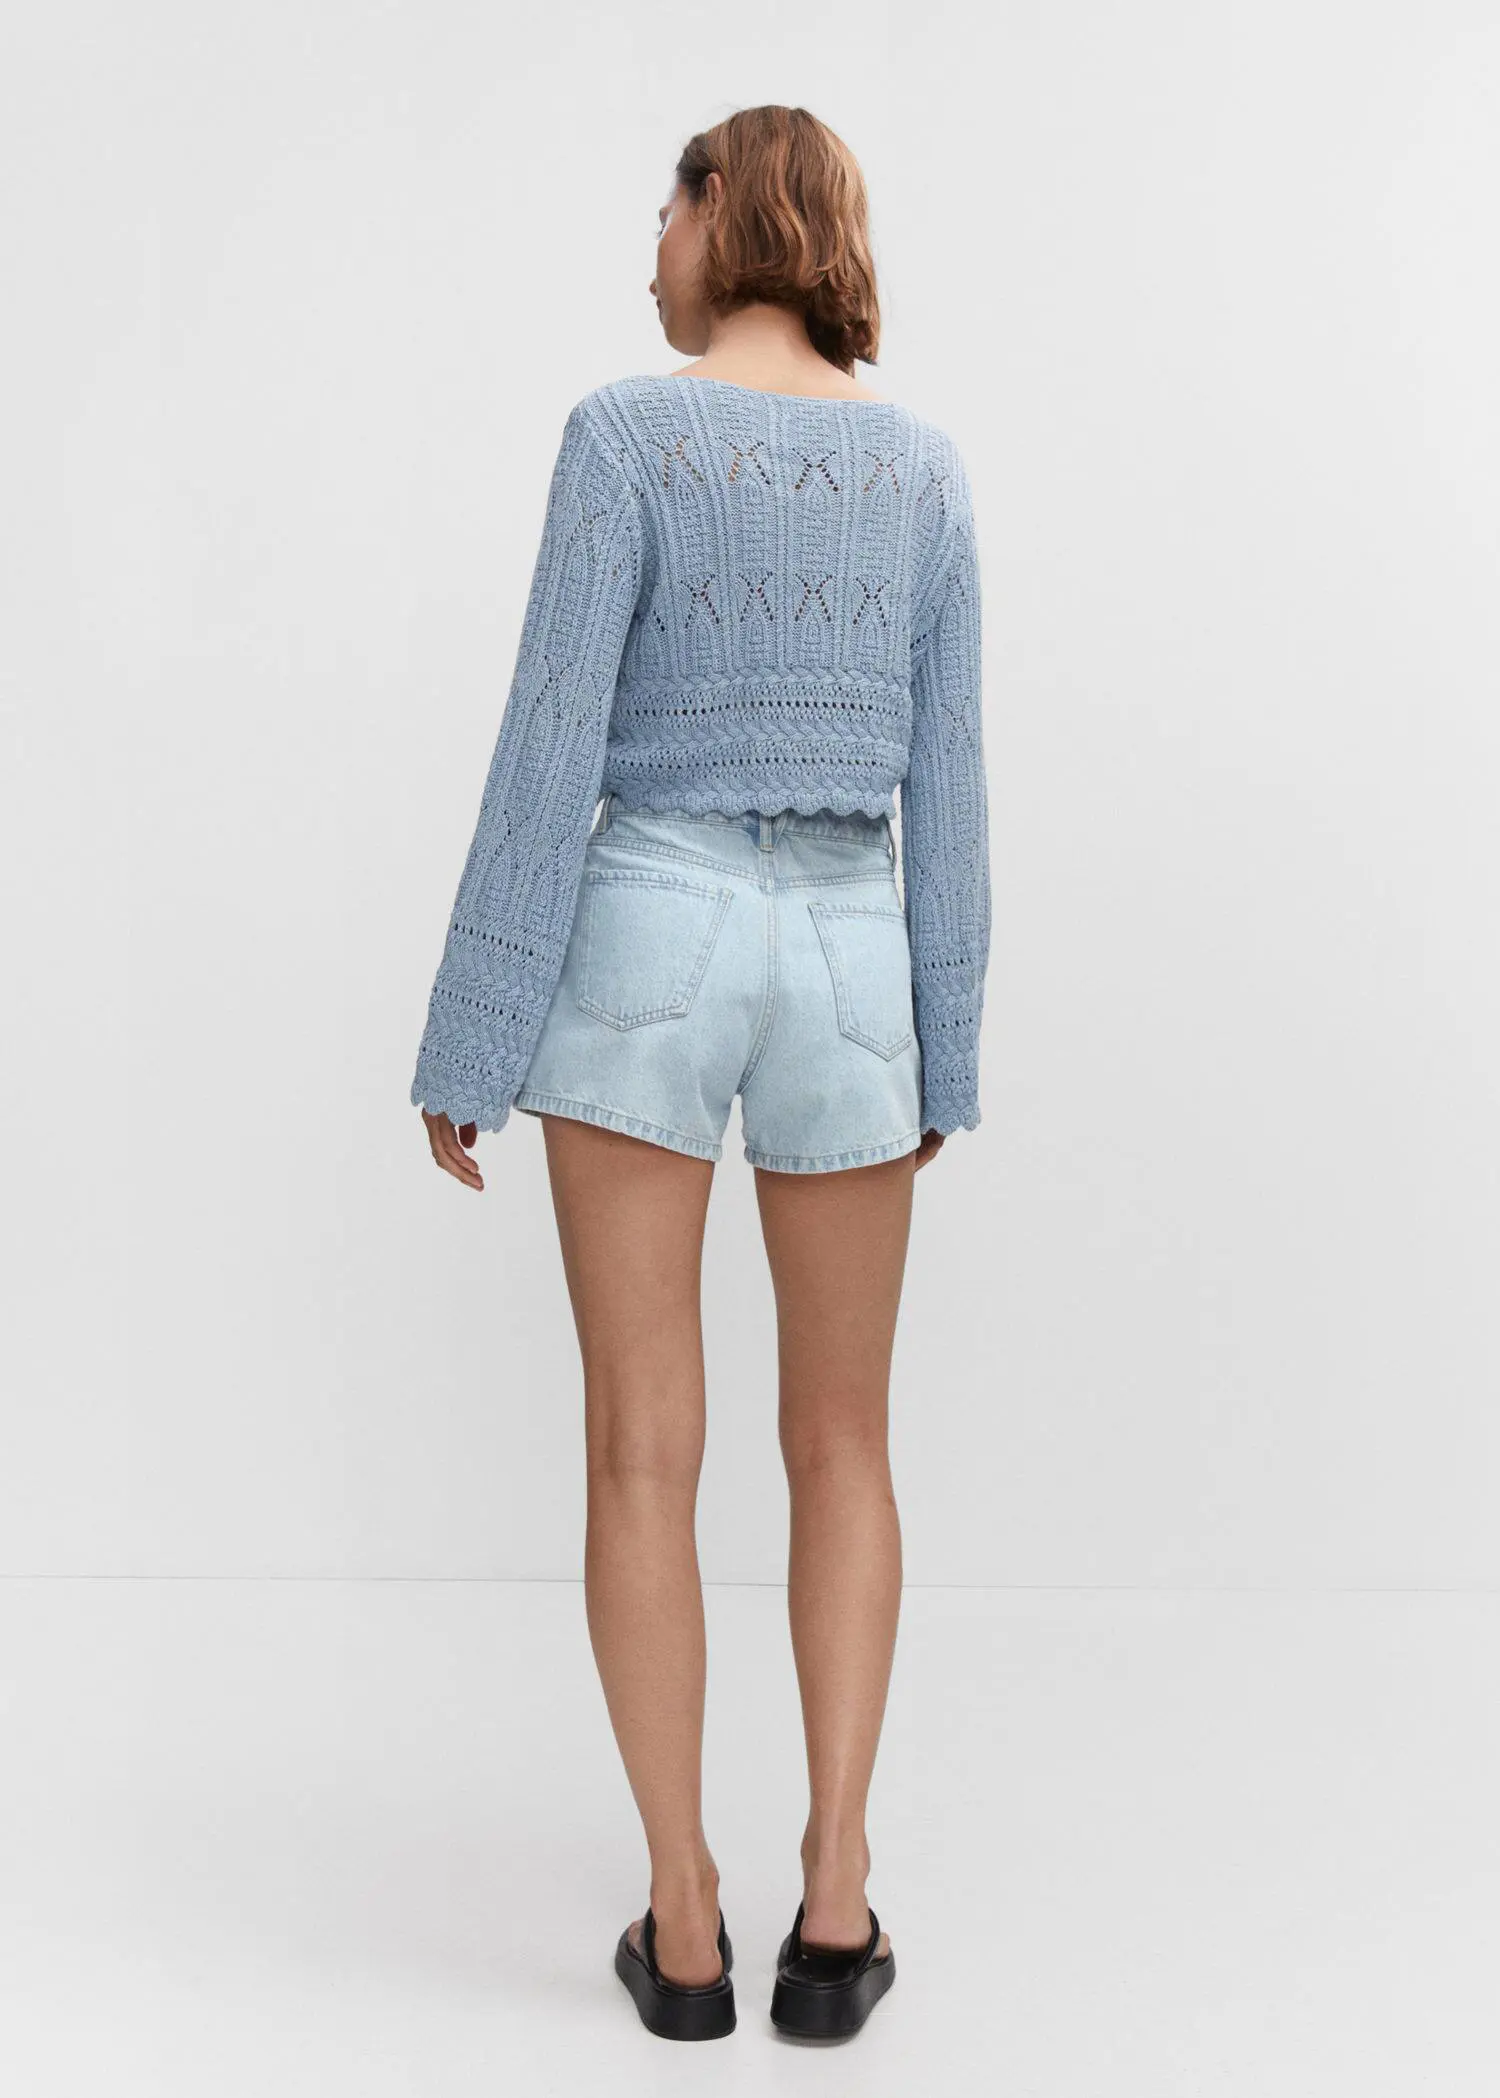 Mango Denim shorts with buttons. a woman wearing a light blue sweater and shorts. 